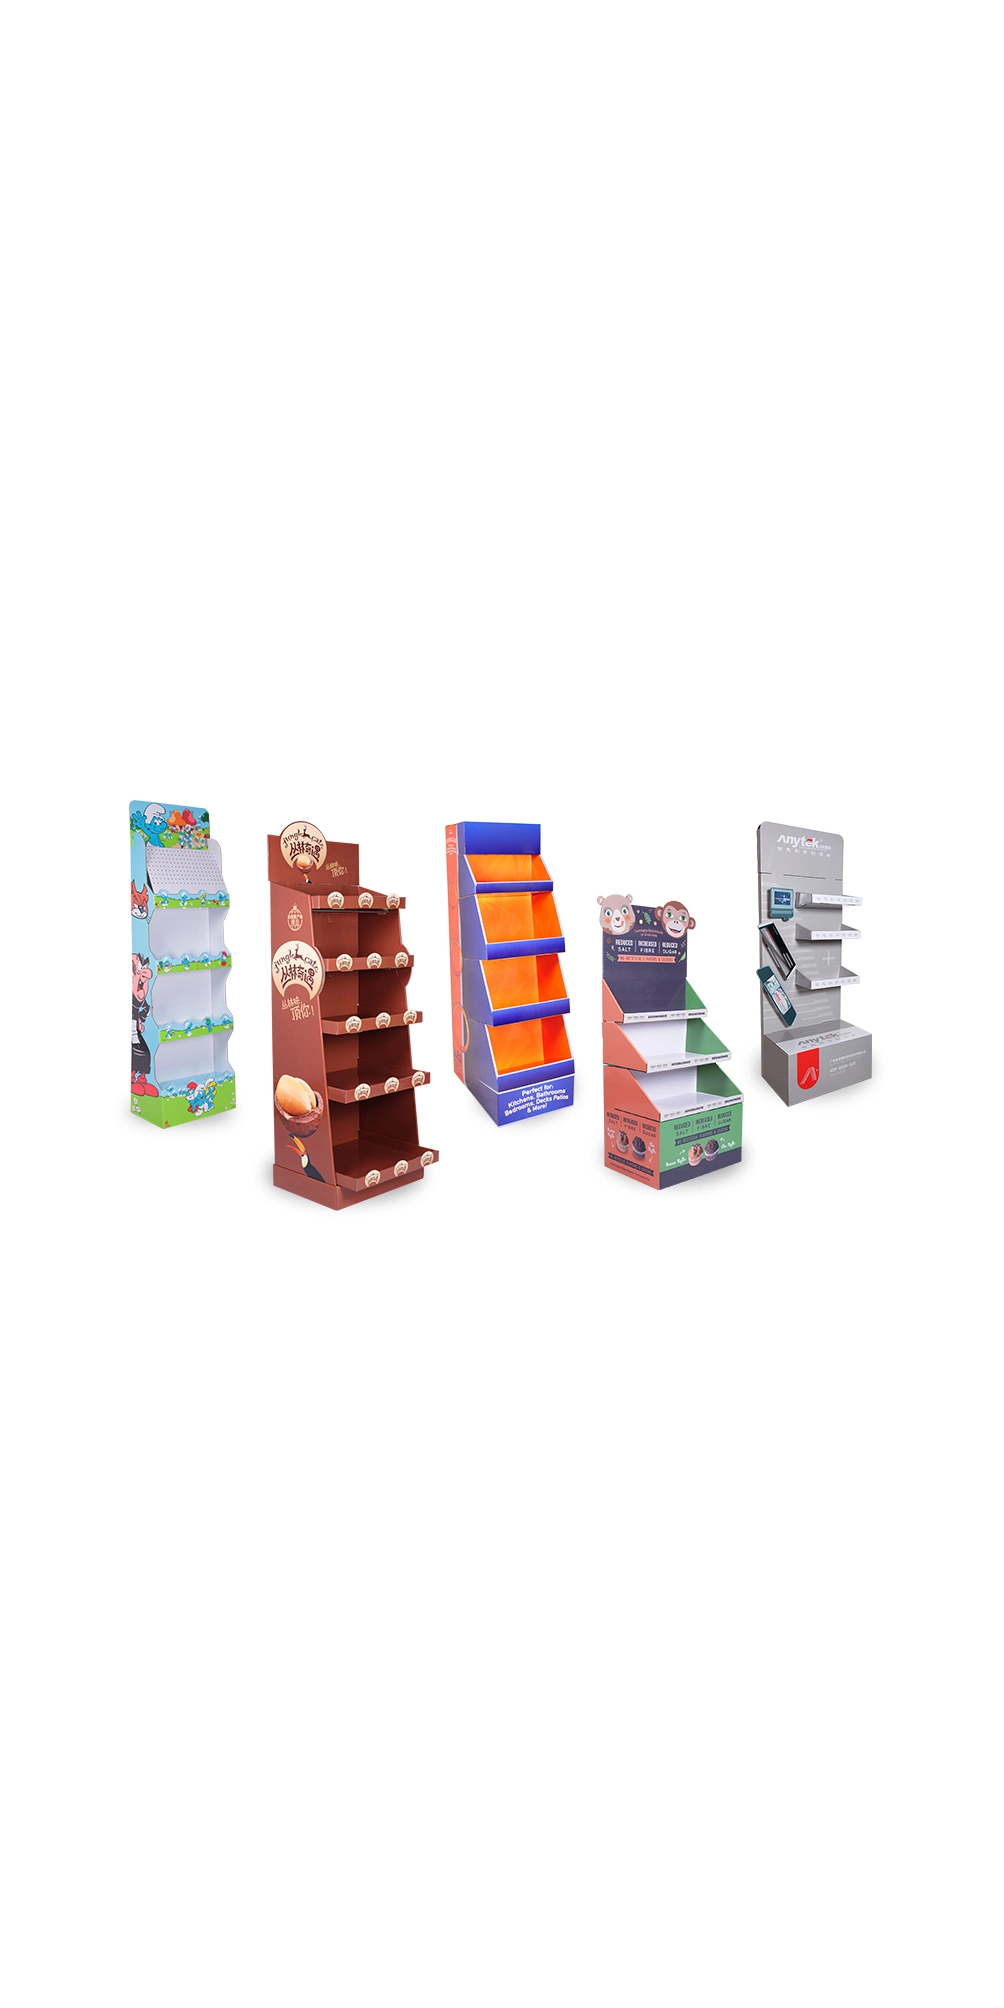 New Design Custom Corrugated Paper Flooring Display Rack/ Cardboard Display Stand for Toothbrush Toothpaste Retail